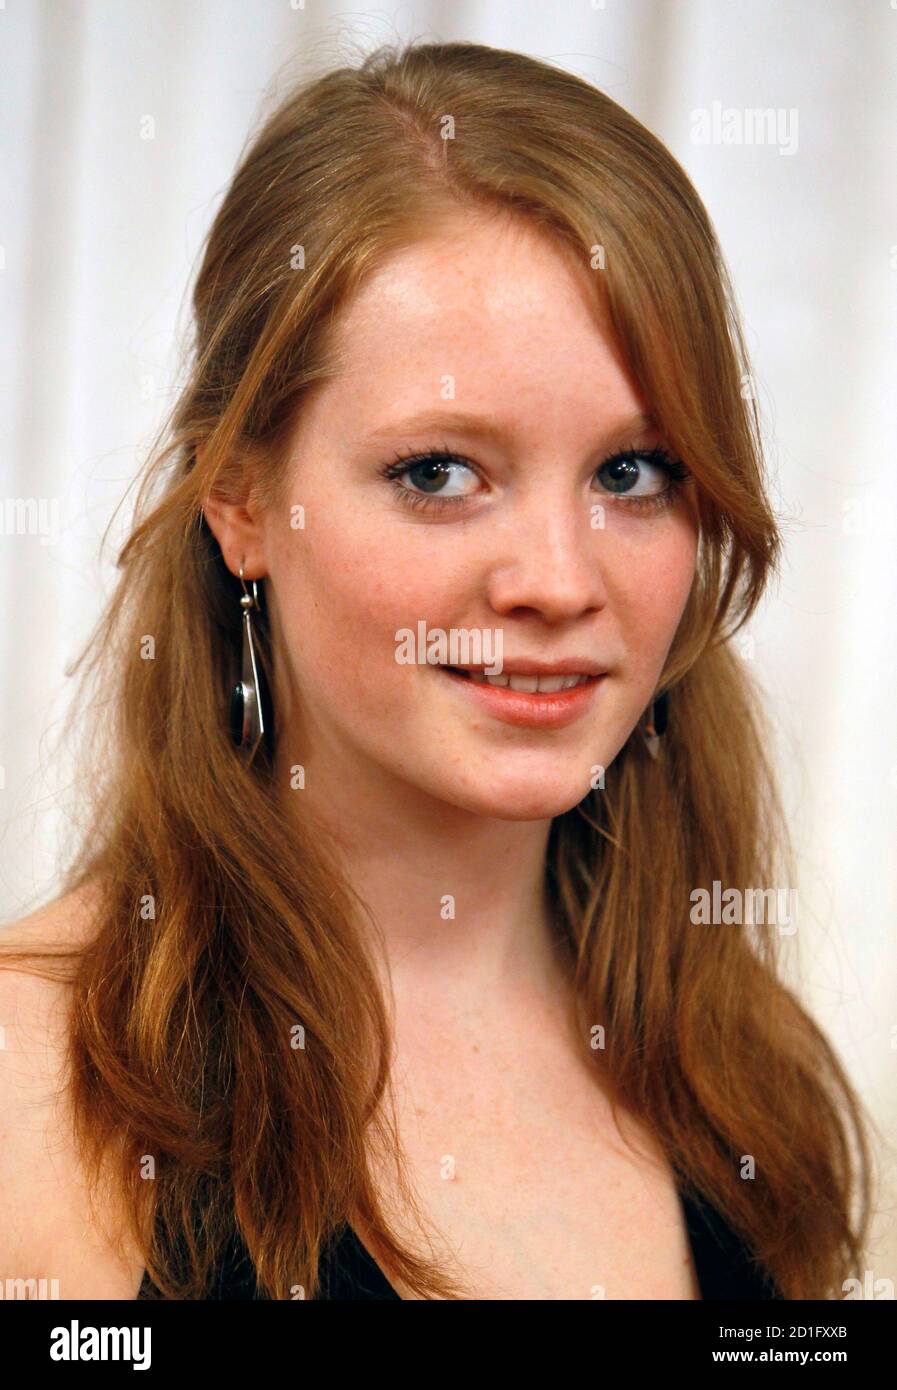 Actress Leonie Benesch, from the German film 'The White Ribbon (Das Weisse Band)' which is nominated for a best foreign language film award, poses for photographers ahead of the 82nd Academy Awards in Hollywood, March 5, 2010.  REUTERS/Brian Snyder  (UNITED STATES - Tags: ENTERTAINMENT) Stock Photo